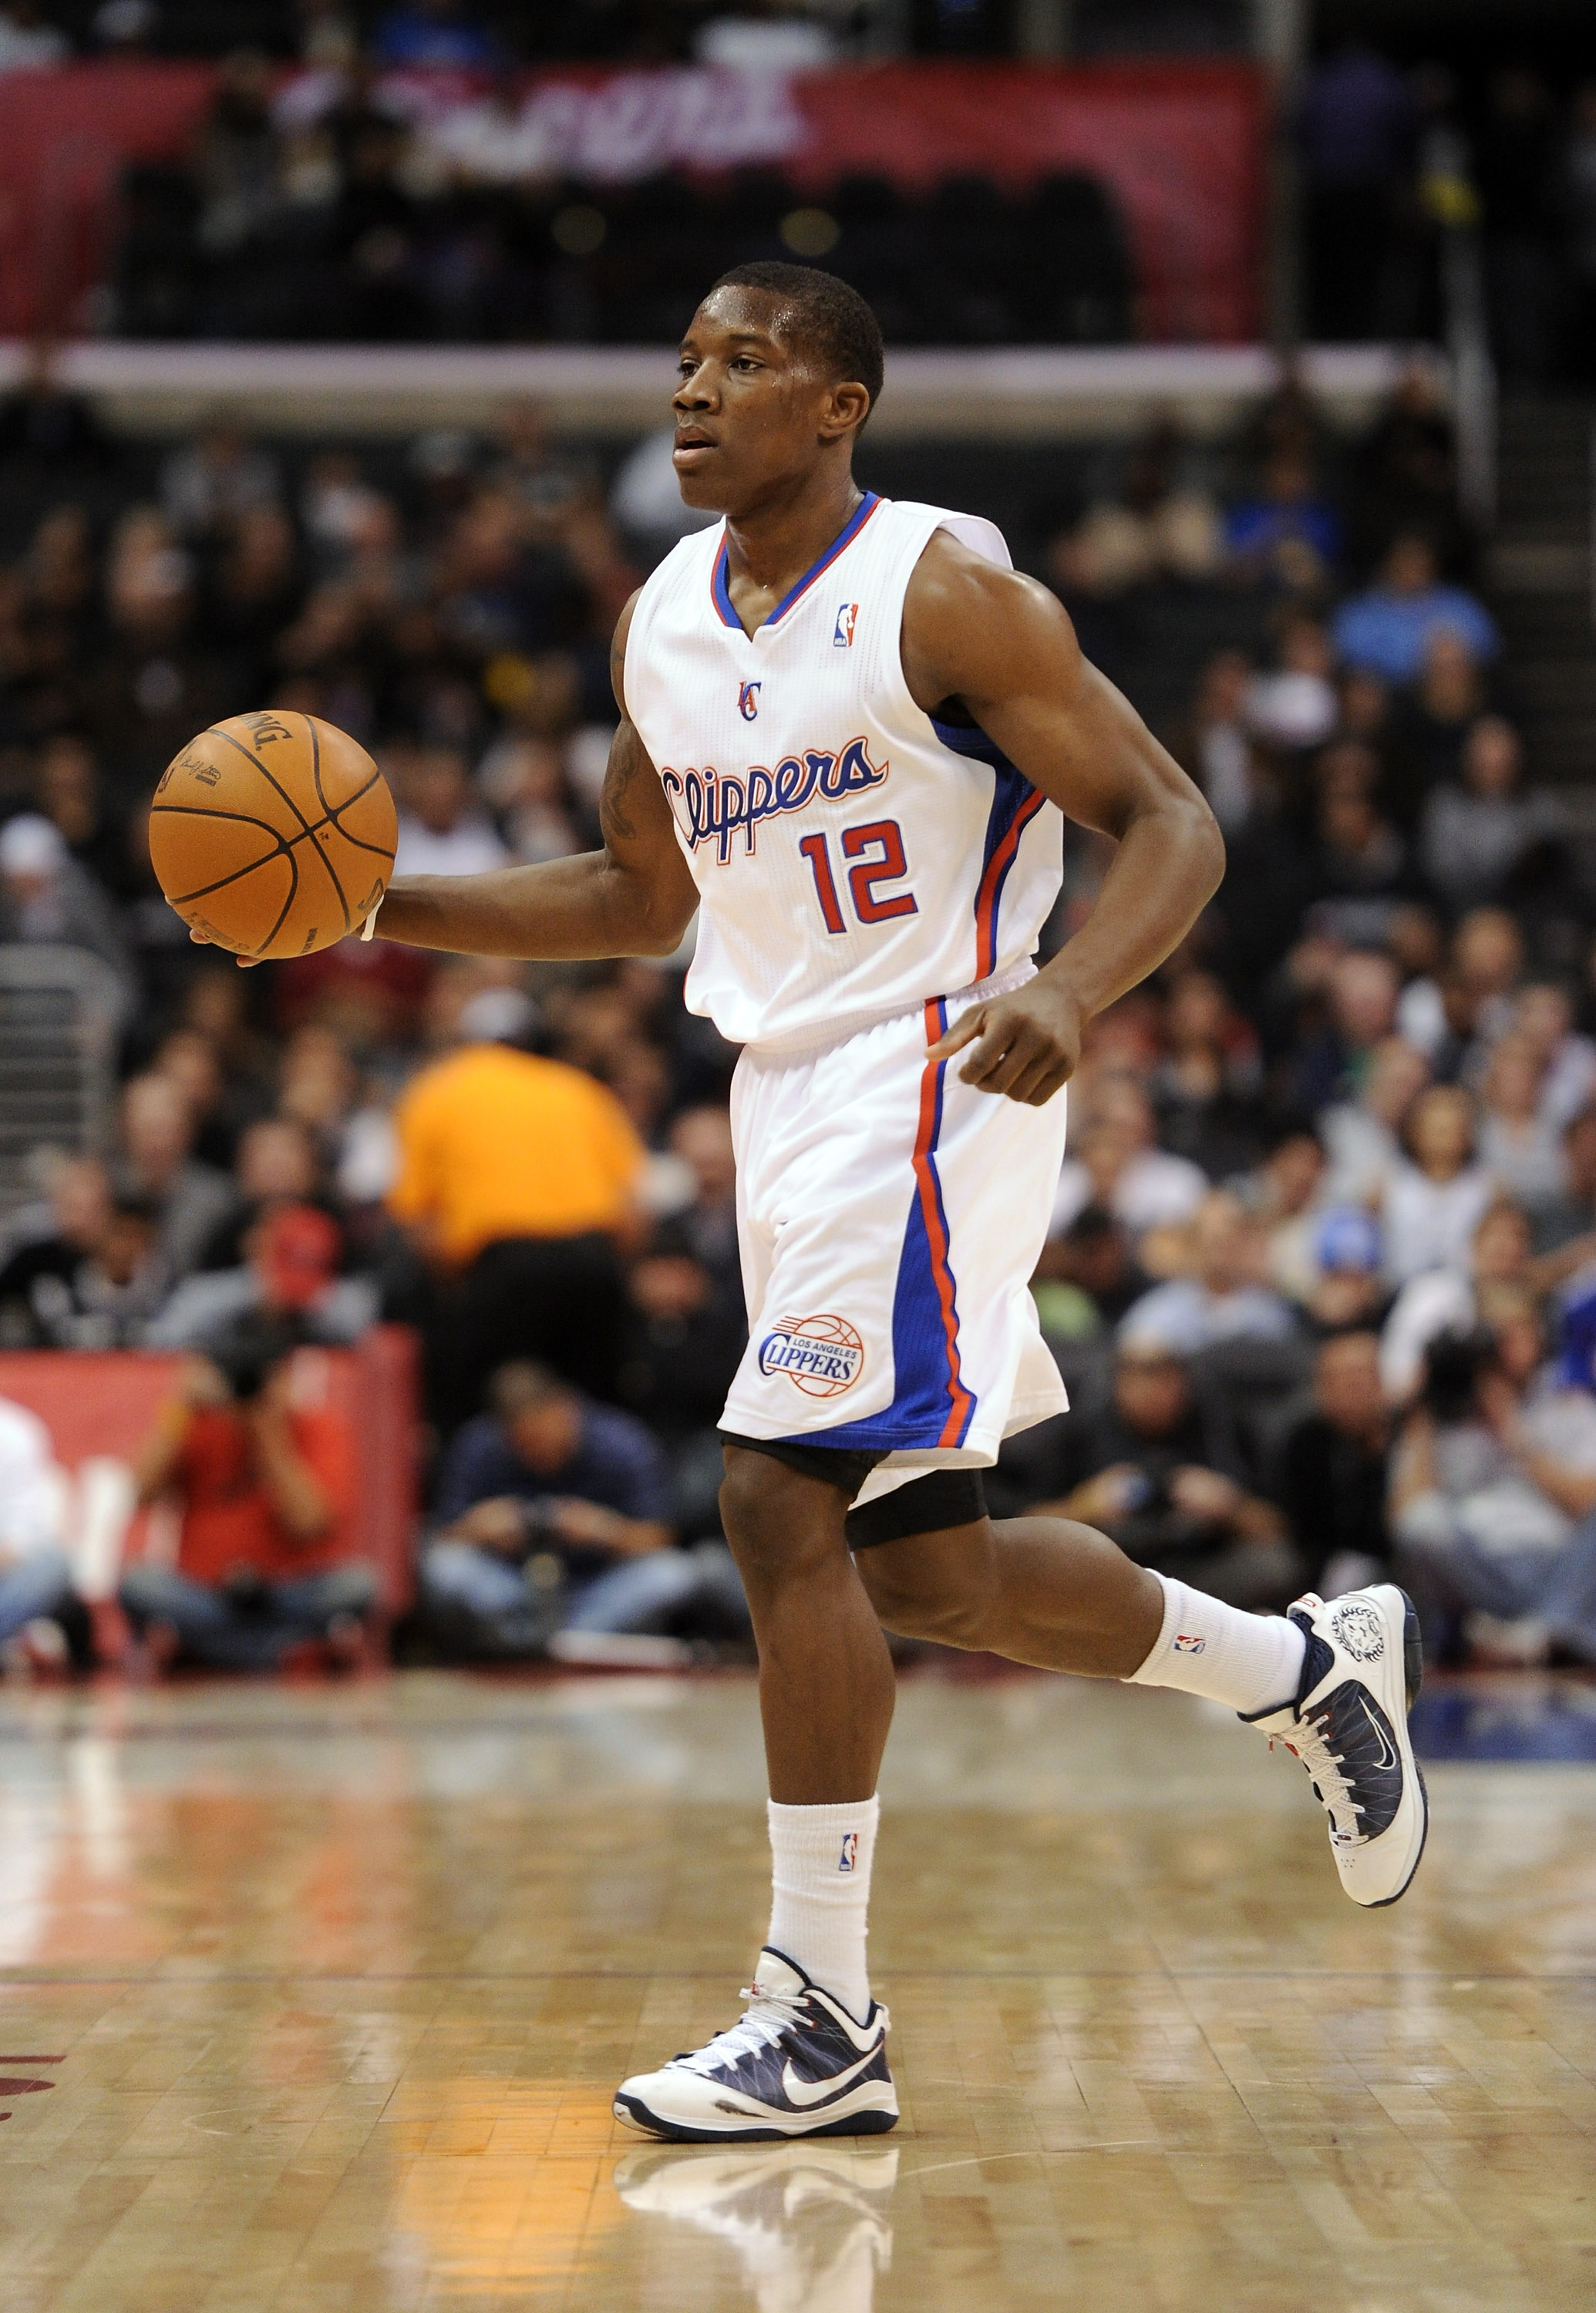 LOS ANGELES, CA - DECEMBER 01:  Eric Bledsoe #12 of the Los Angeles Clippers dribbles against the San Antonio Spurs at the Staples Center on December 1, 2010 in Los Angeles, California.  NOTE TO USER: User expressly acknowledges and agrees that, by downlo